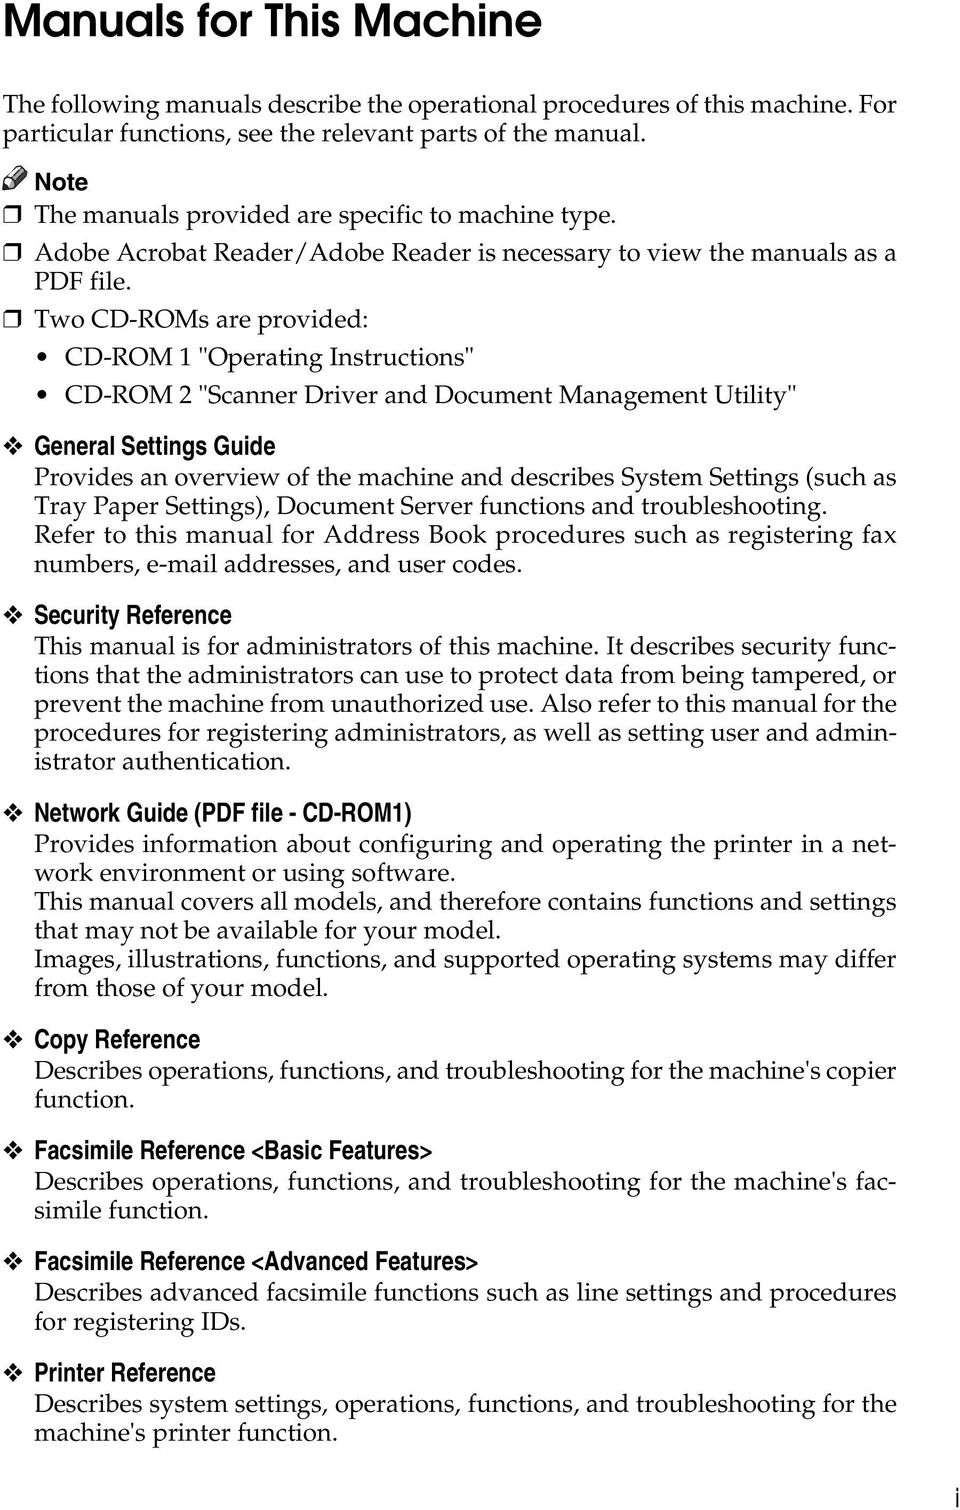 Two CD-ROMs are provided: CD-ROM 1 "Operating Instructions" CD-ROM 2 "Scanner Driver and Document Management Utility" General Settings Guide Provides an overview of the machine and describes System